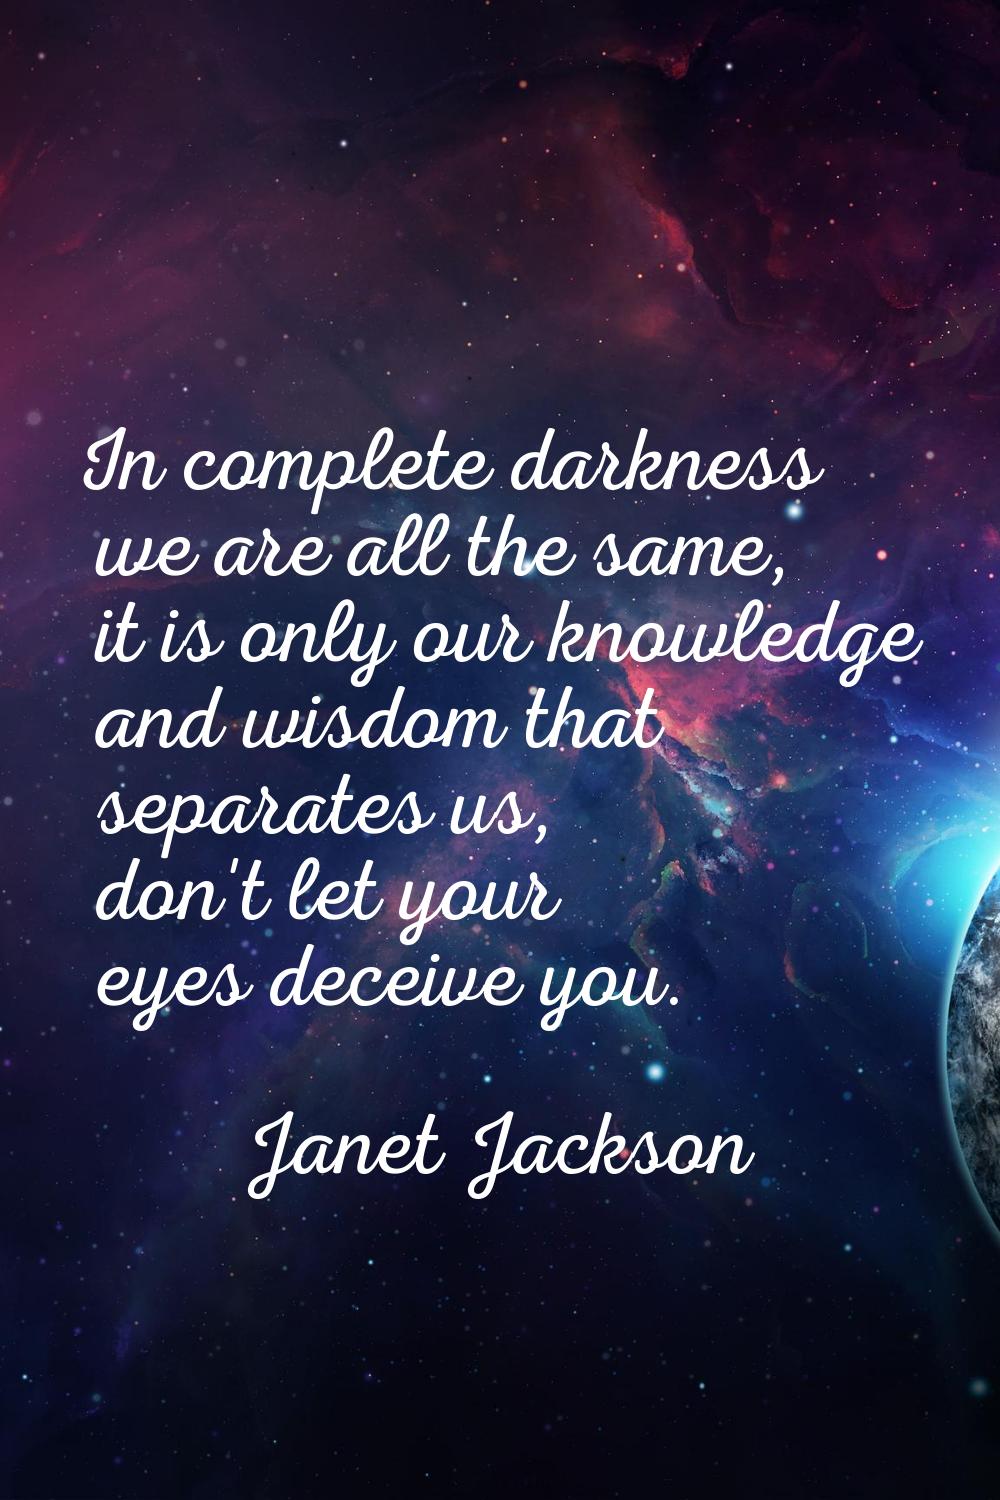 In complete darkness we are all the same, it is only our knowledge and wisdom that separates us, do